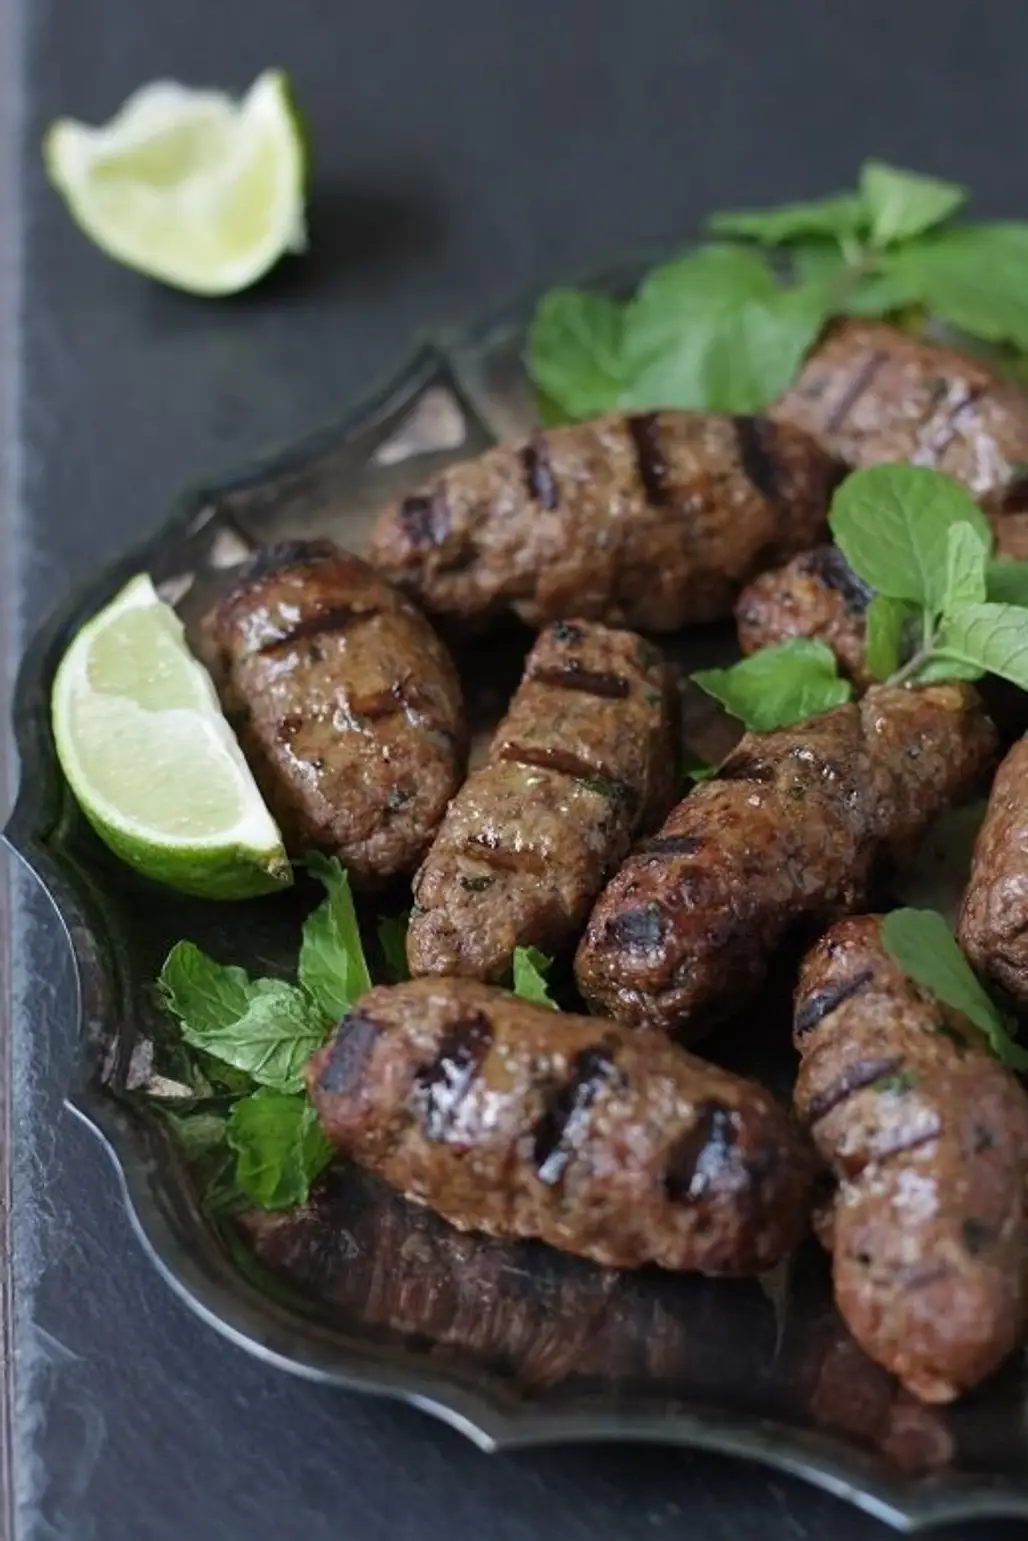 Make Your Own Merguez Sausages